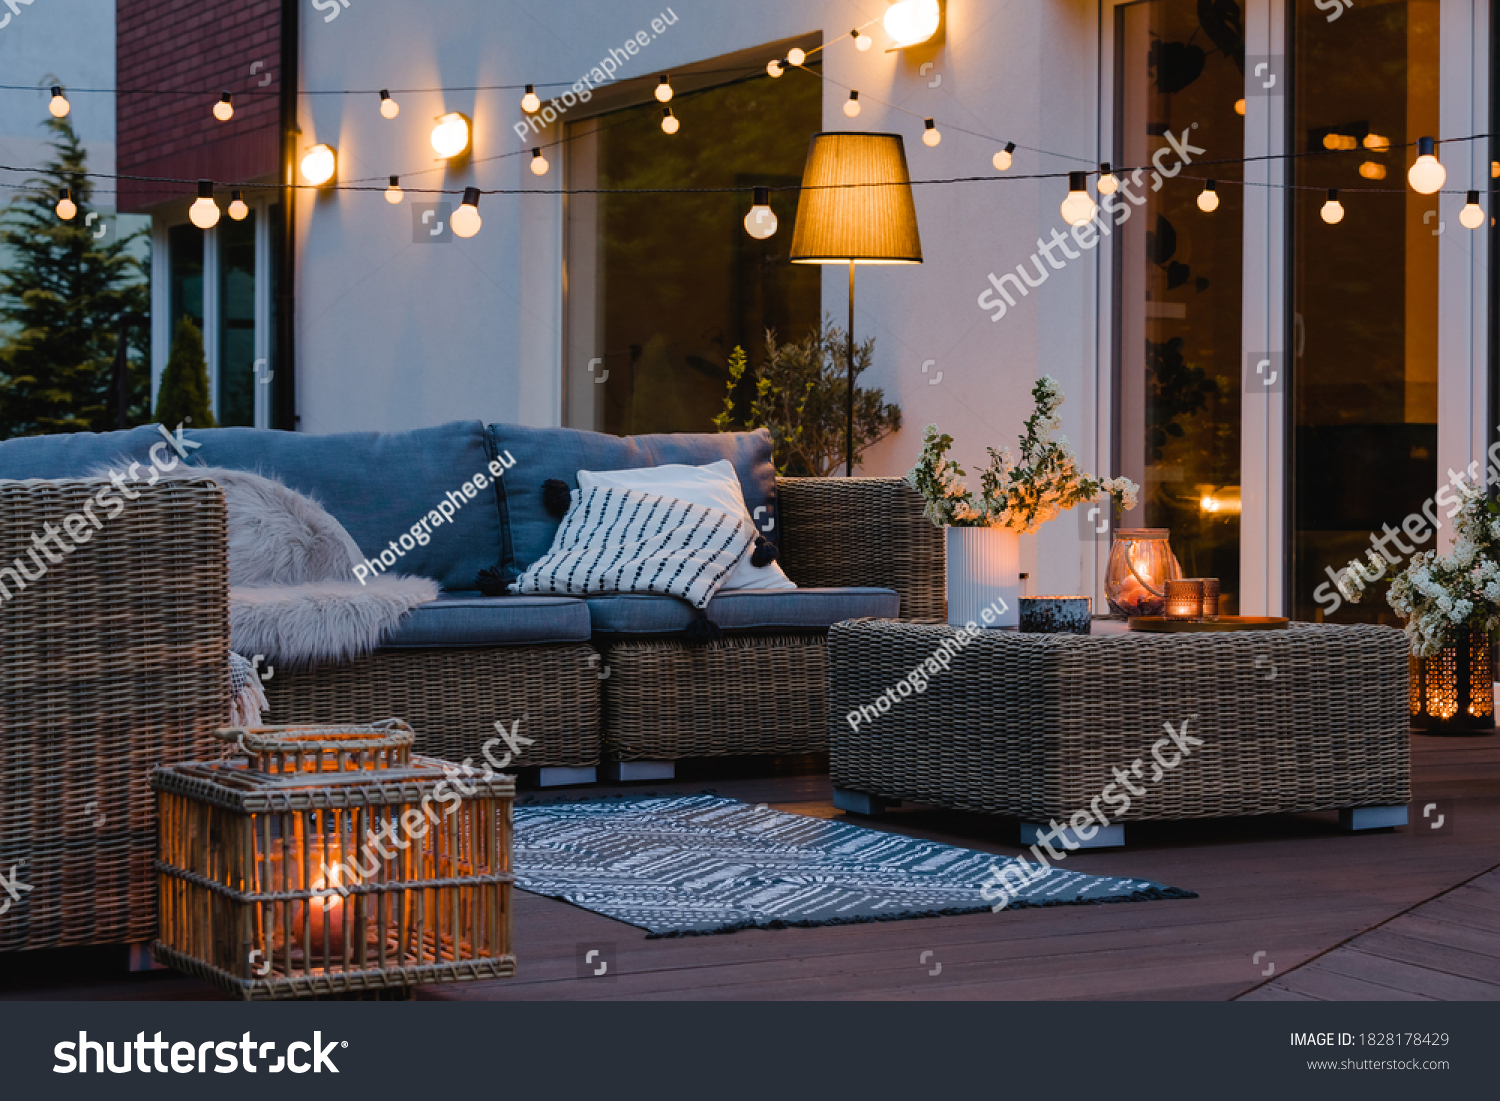 Summer evening on the patio of beautiful suburban house with lights in the garden garden #1828178429